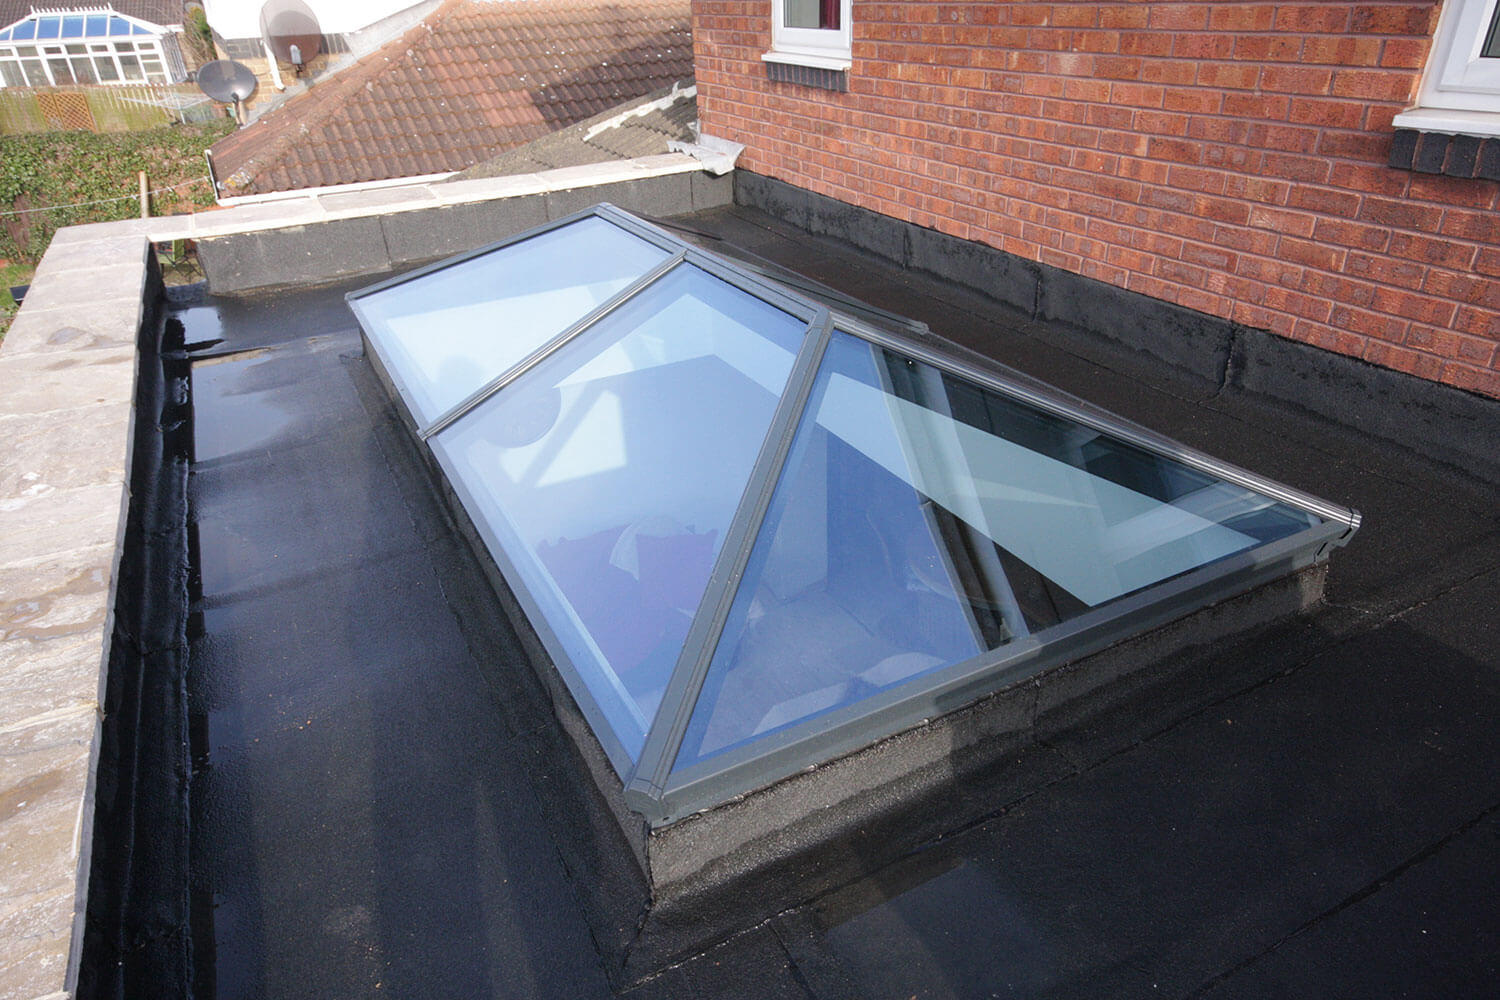 Roof Lanterns Installed for homeowners in redhill